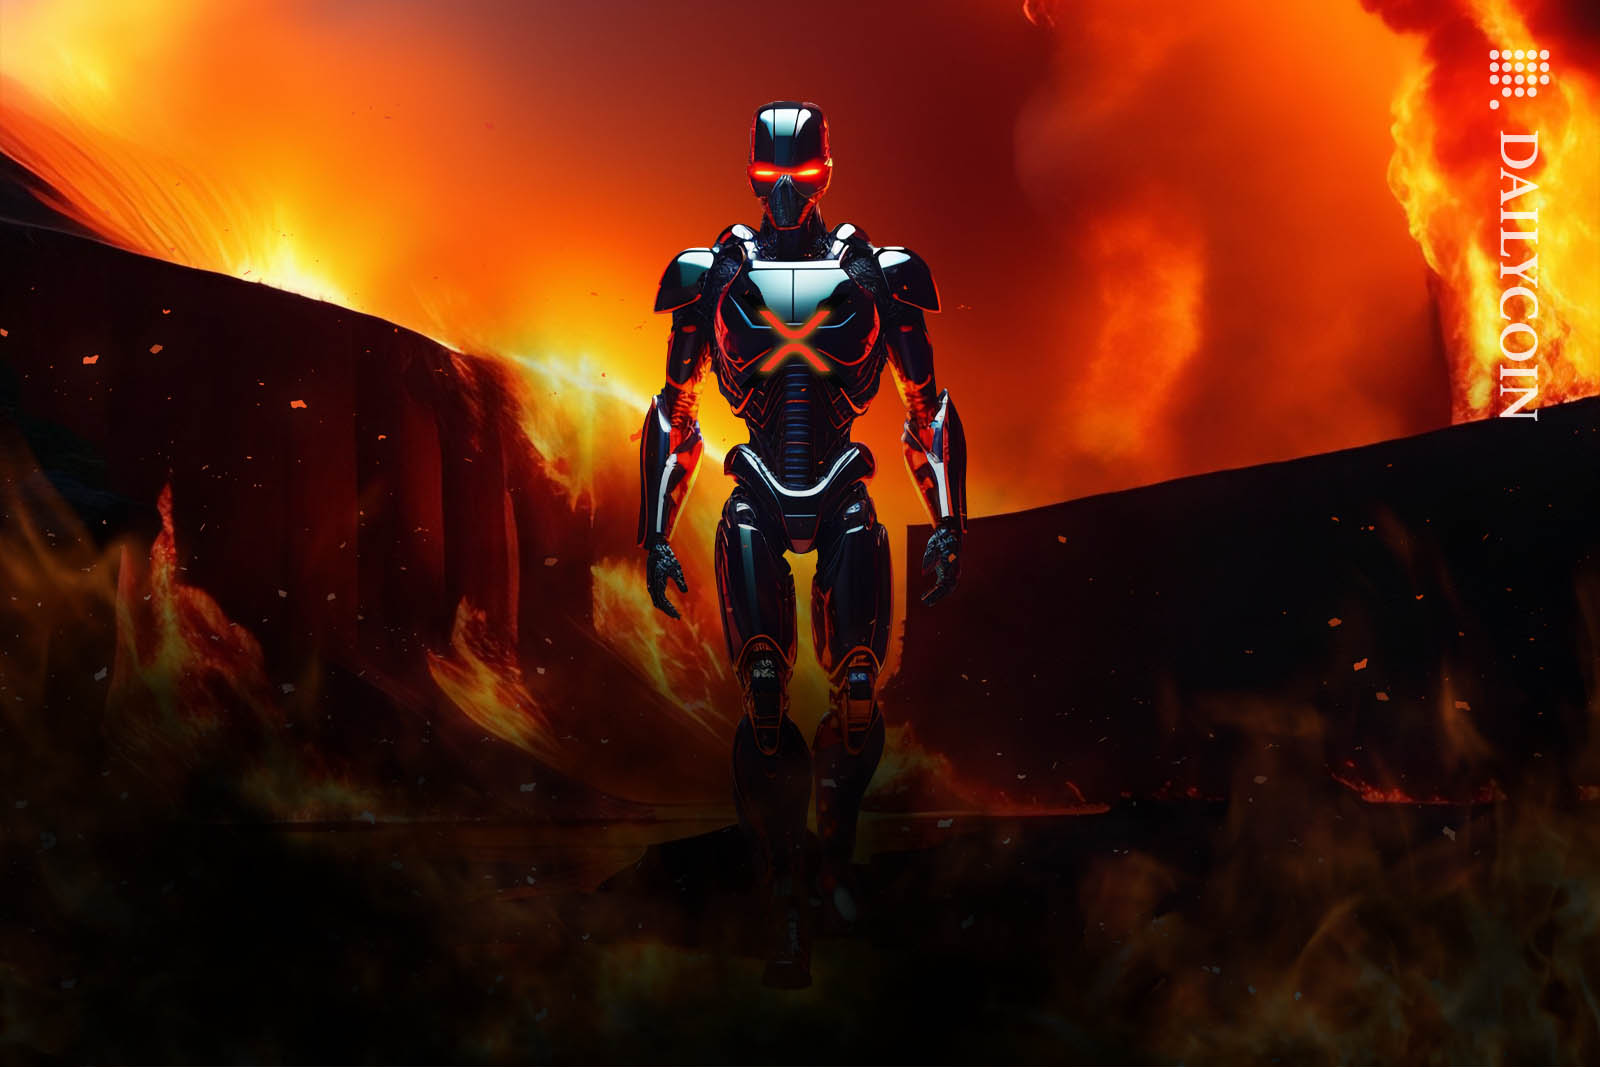 XRP robot walking out of a fiery inferno unharmed.